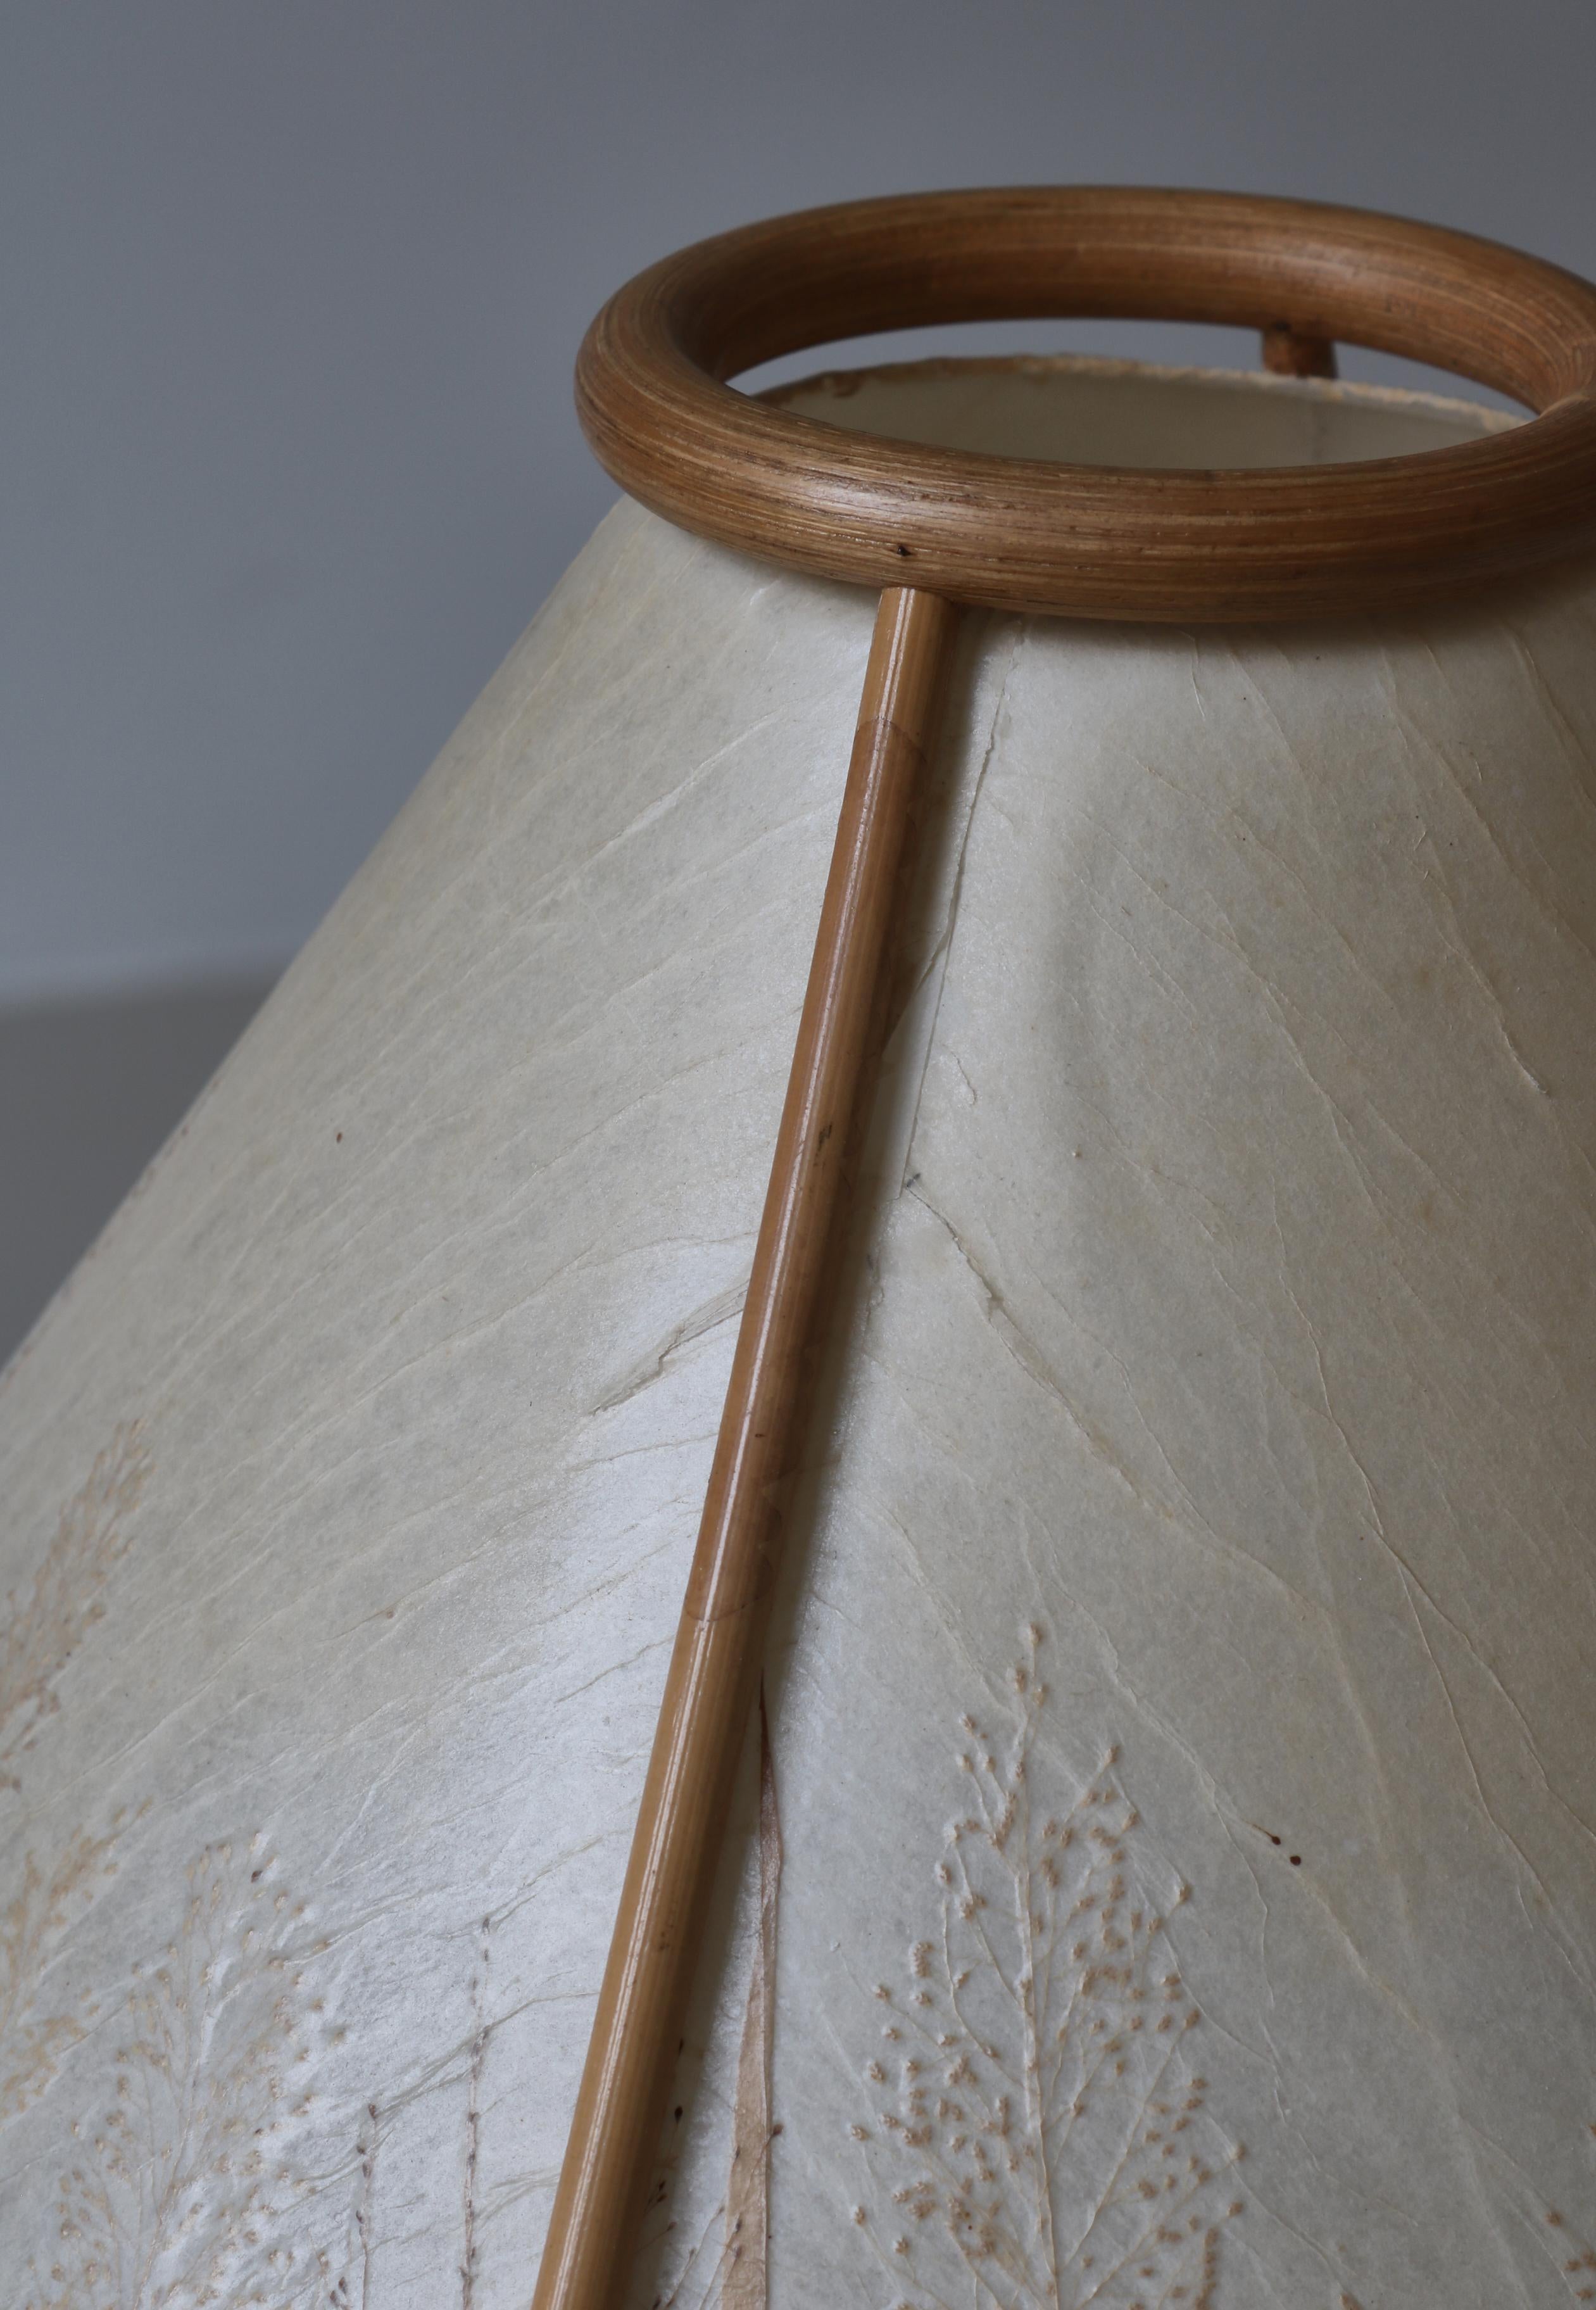 Scandinavian Wabi-Sabi Bamboo Table Lamp Shade with Pressed Plants, 1950s For Sale 6